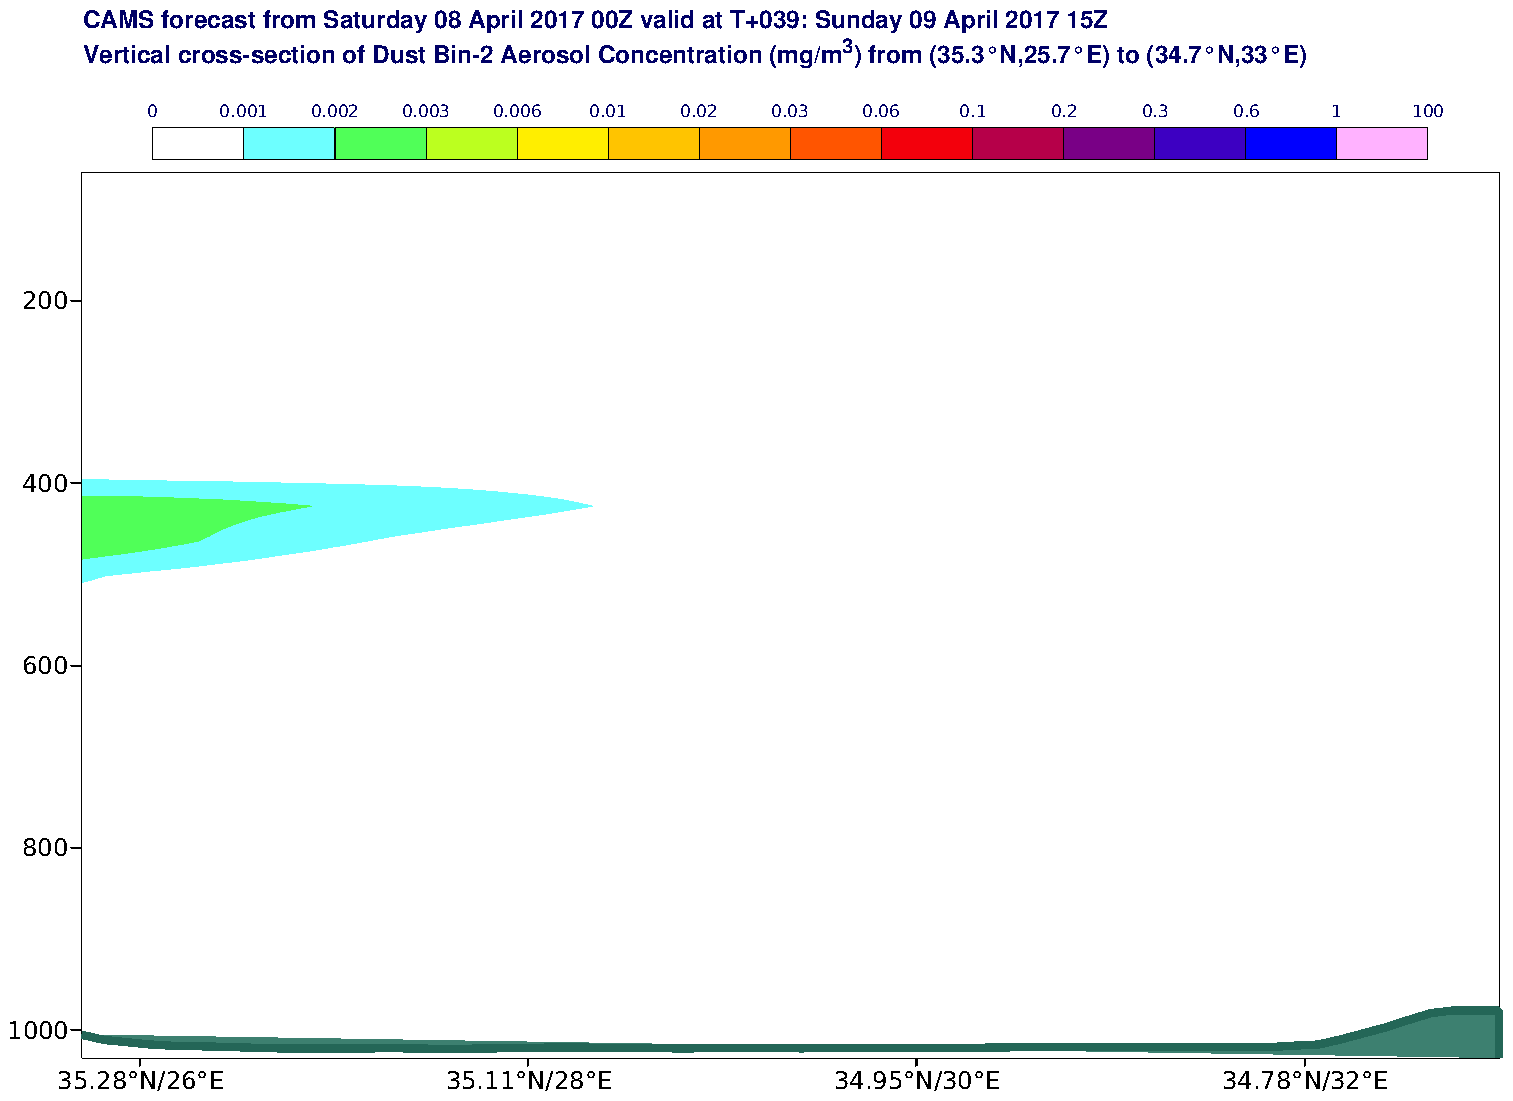 Vertical cross-section of Dust Bin-2 Aerosol Concentration (mg/m3) valid at T39 - 2017-04-09 15:00